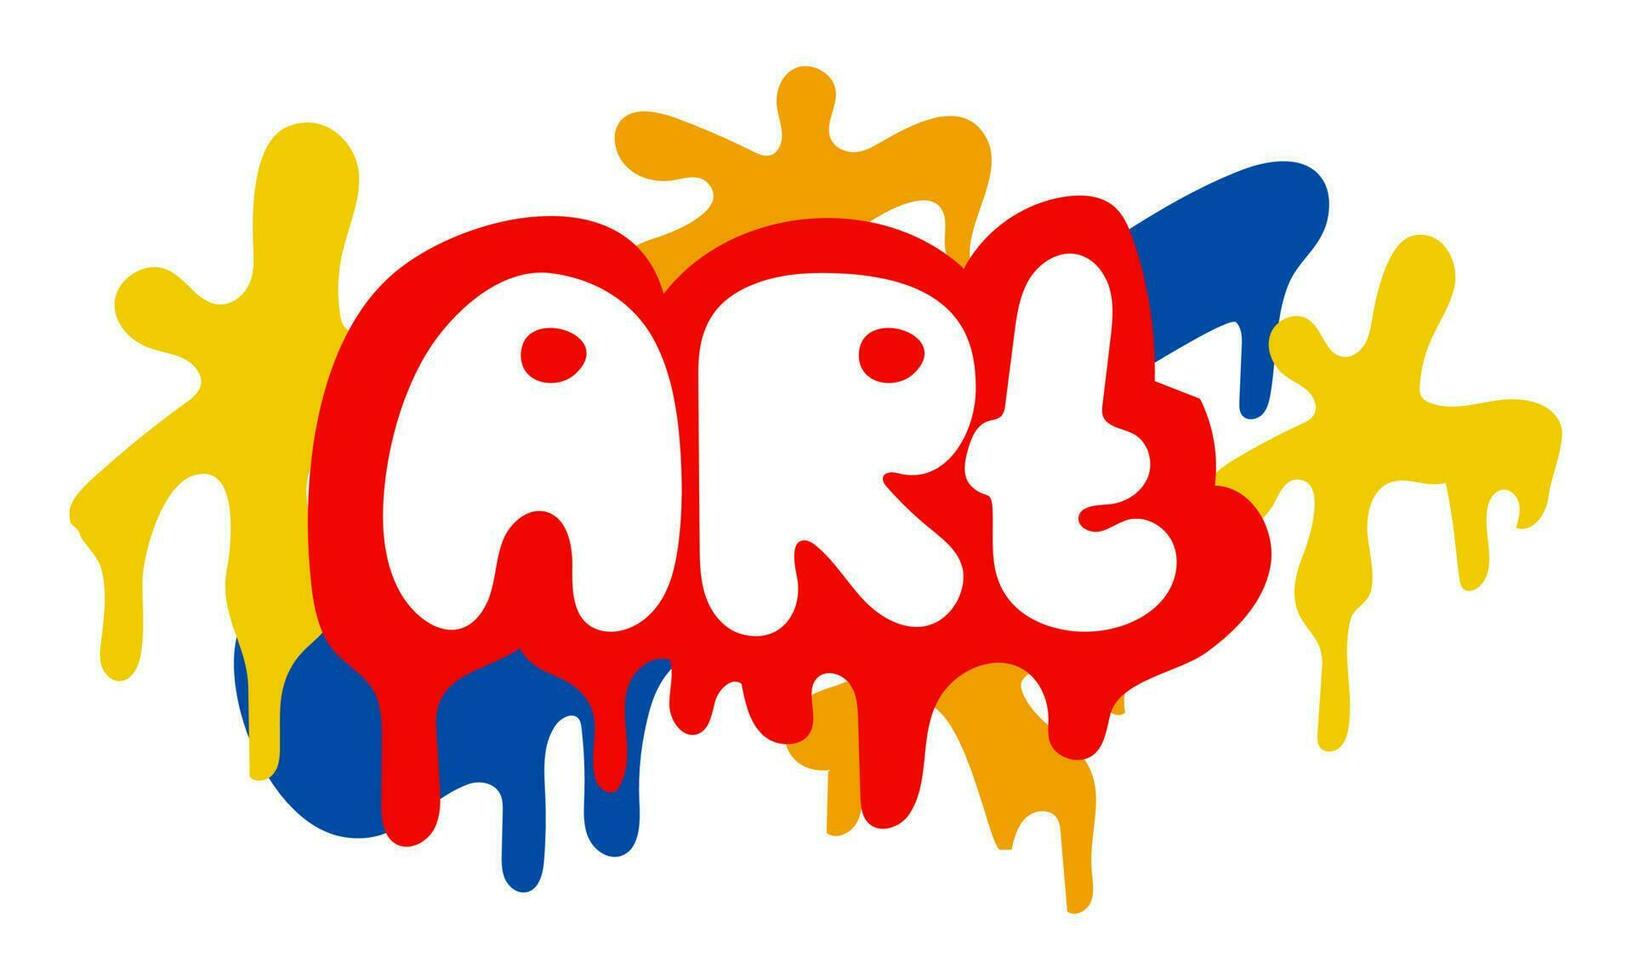 Colorful lettering art in a rounded graffiti style. Rounded letters and shapes with streaks of paint. Vector illustration isolated on a white background. Imitation of street graffiti, sticker